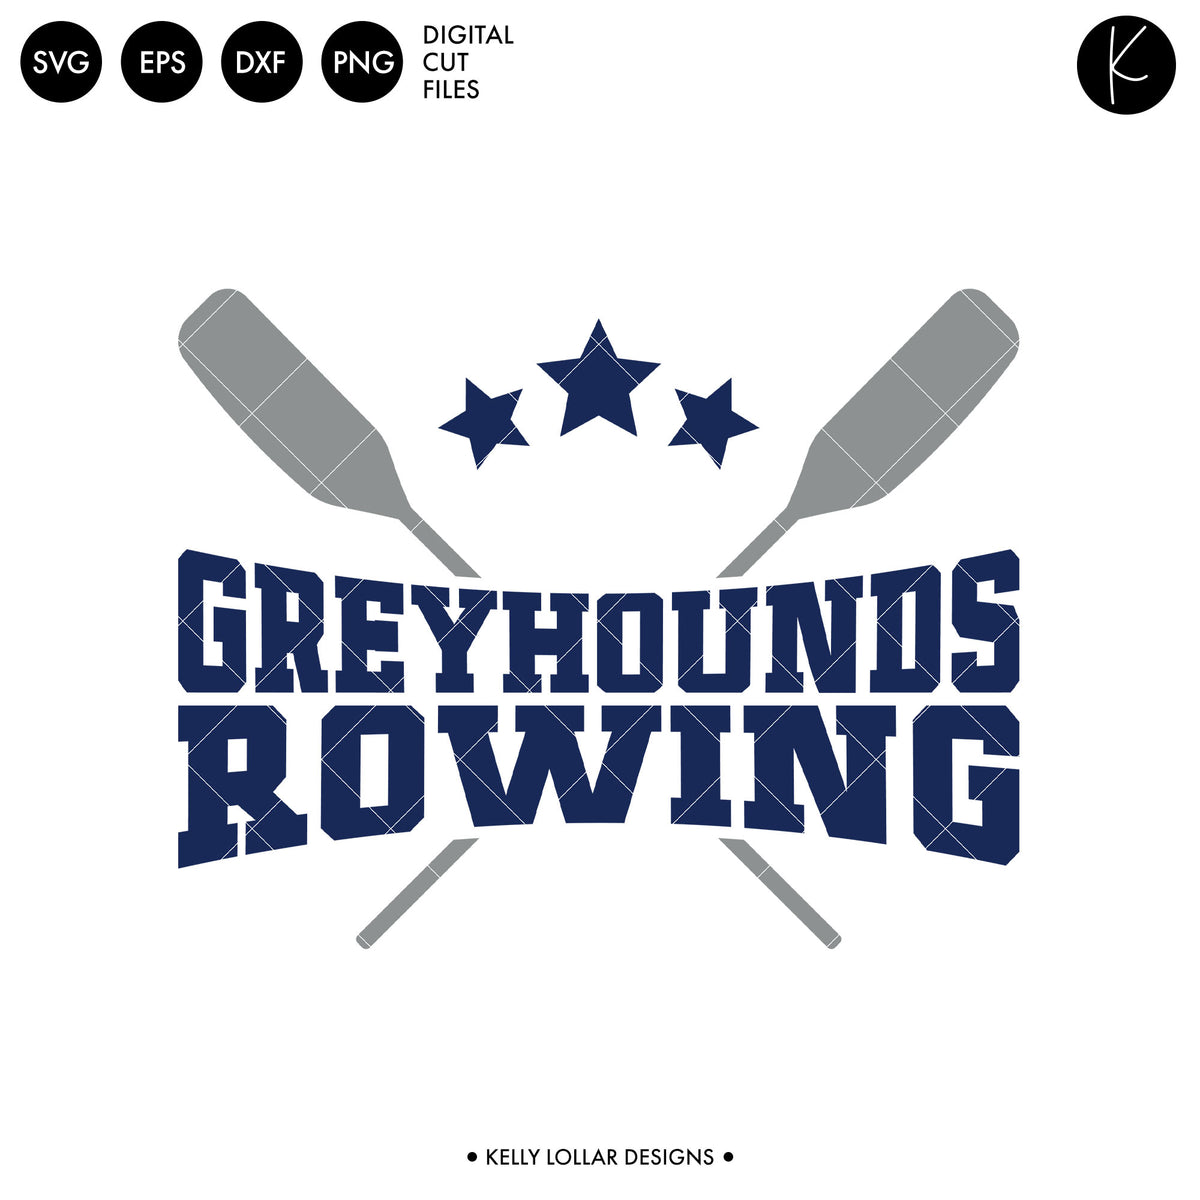 Greyhounds Rowing Crew Bundle | SVG DXF EPS PNG Cut Files